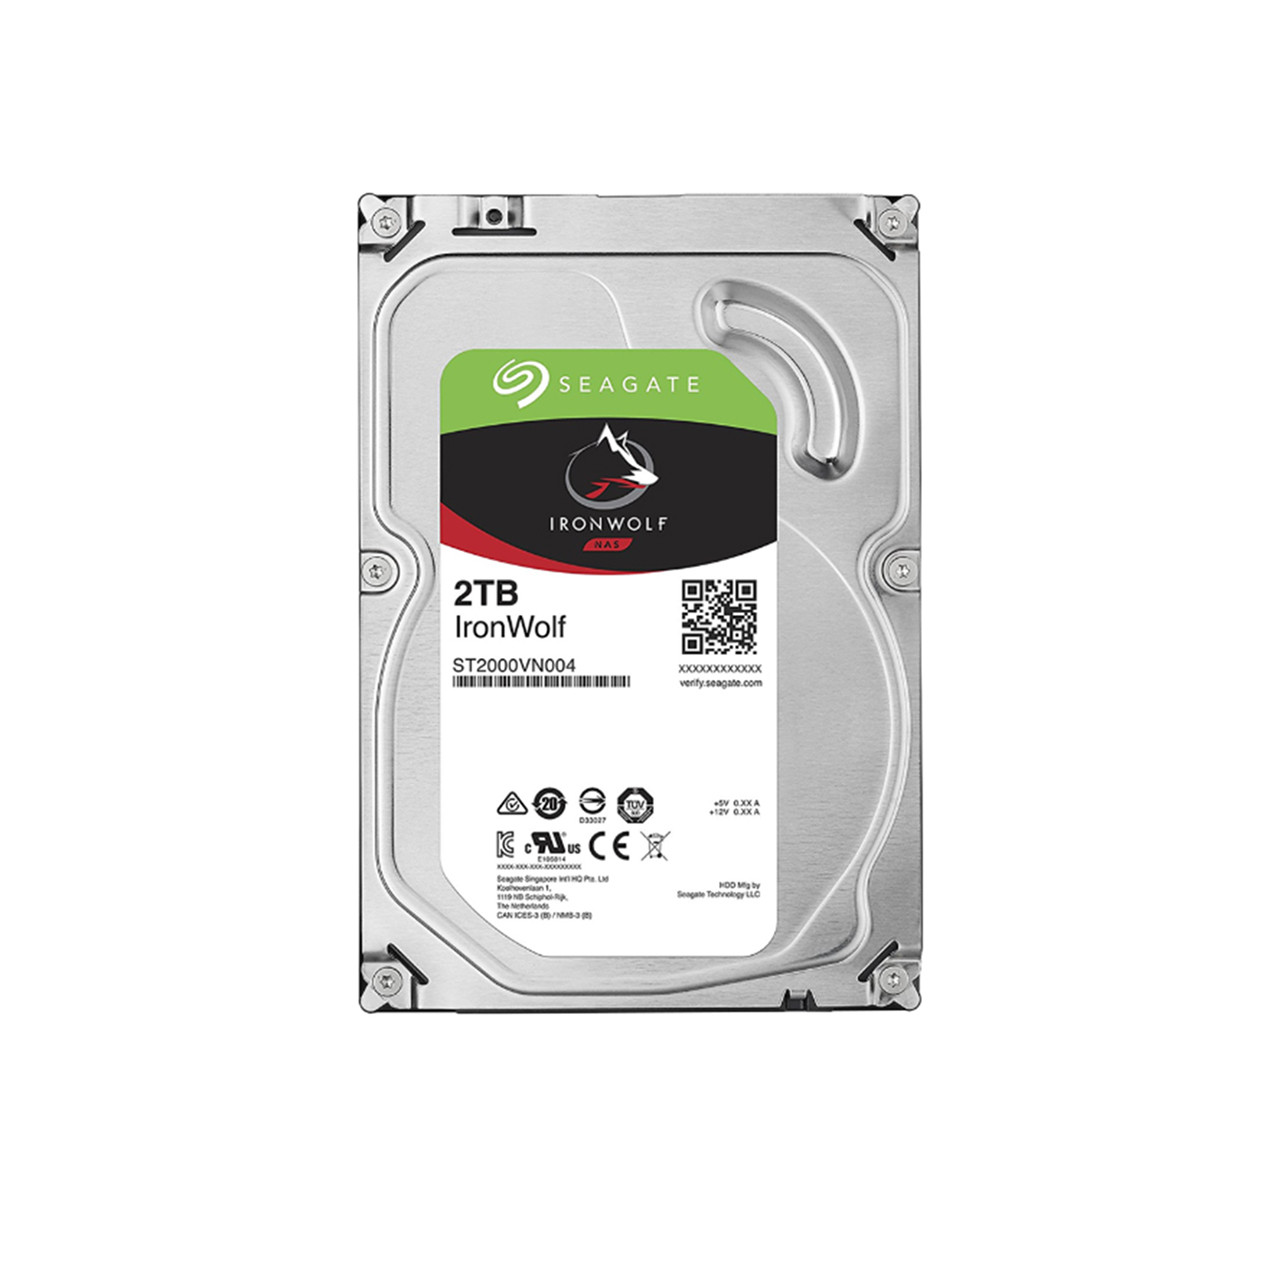 DISCO DURO SEAGATE IRONWOLF 2TB 64MB ST2000VN004